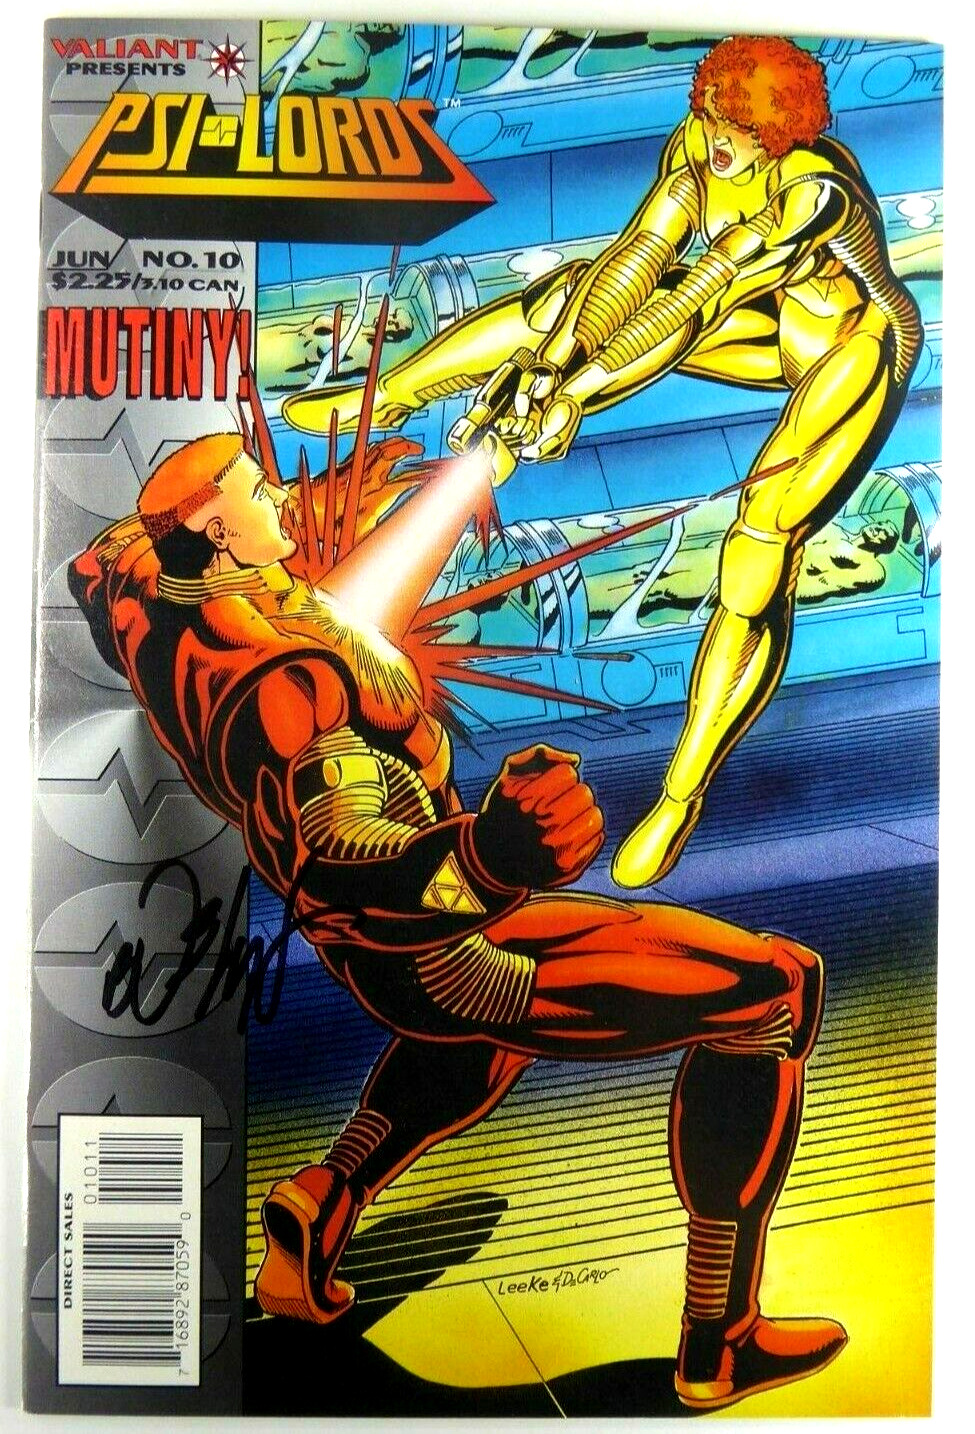 Valiant PSI-LORDS (1995) #10 SIGNED by Bob LAYTON w/COA NM (9.4) Ships FREE